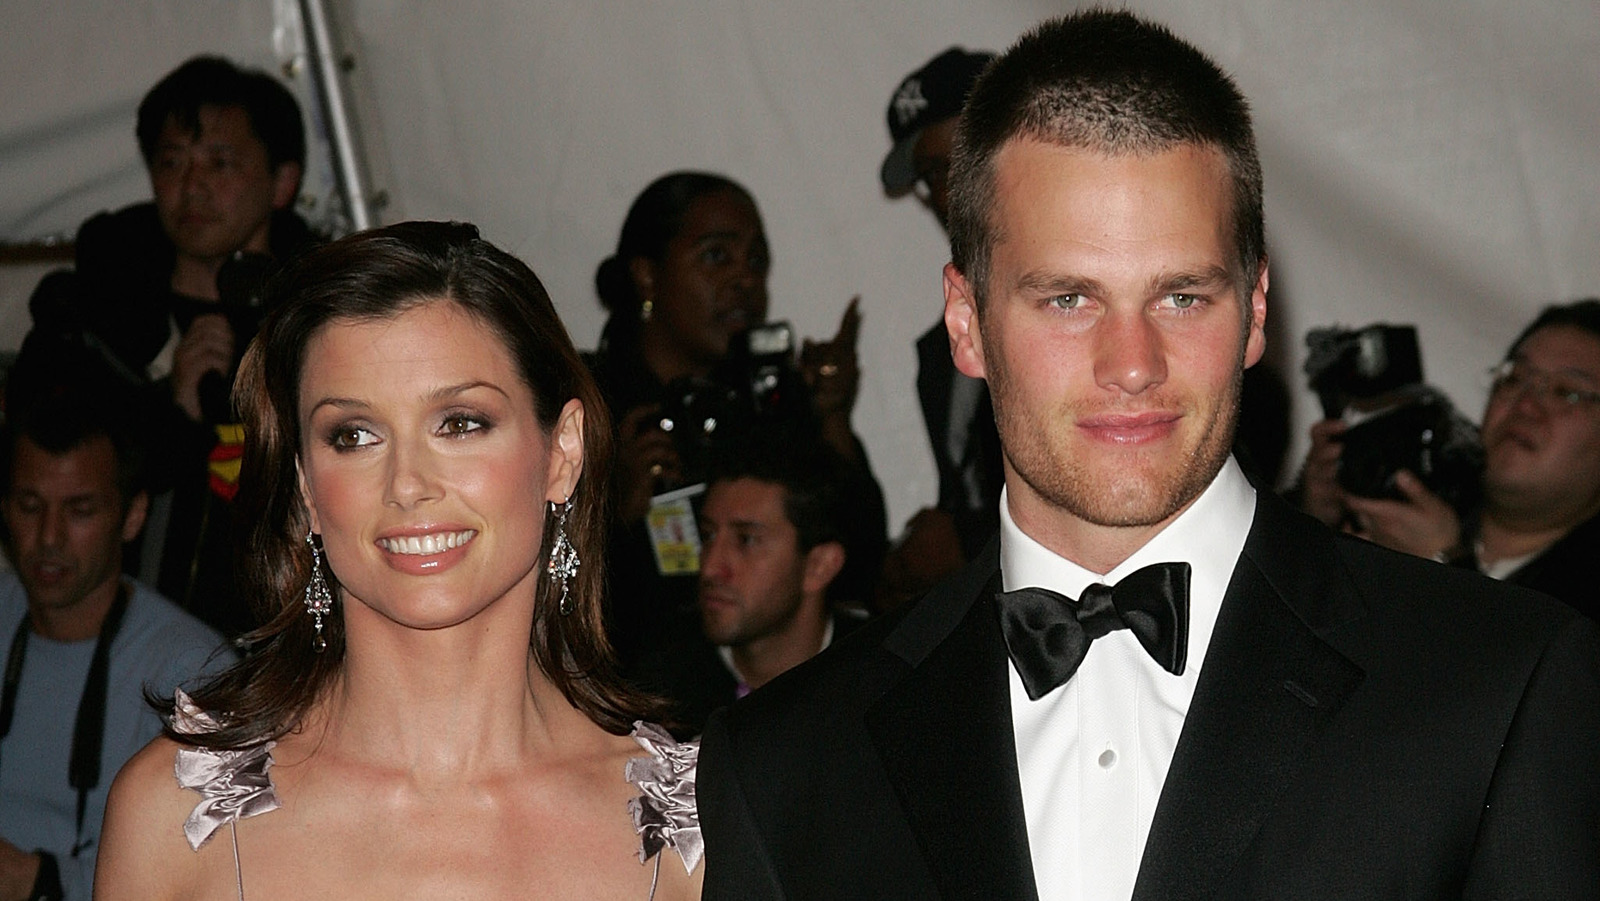 Bridget Moynahan's Husband Andrew Frankel: Everything To Know